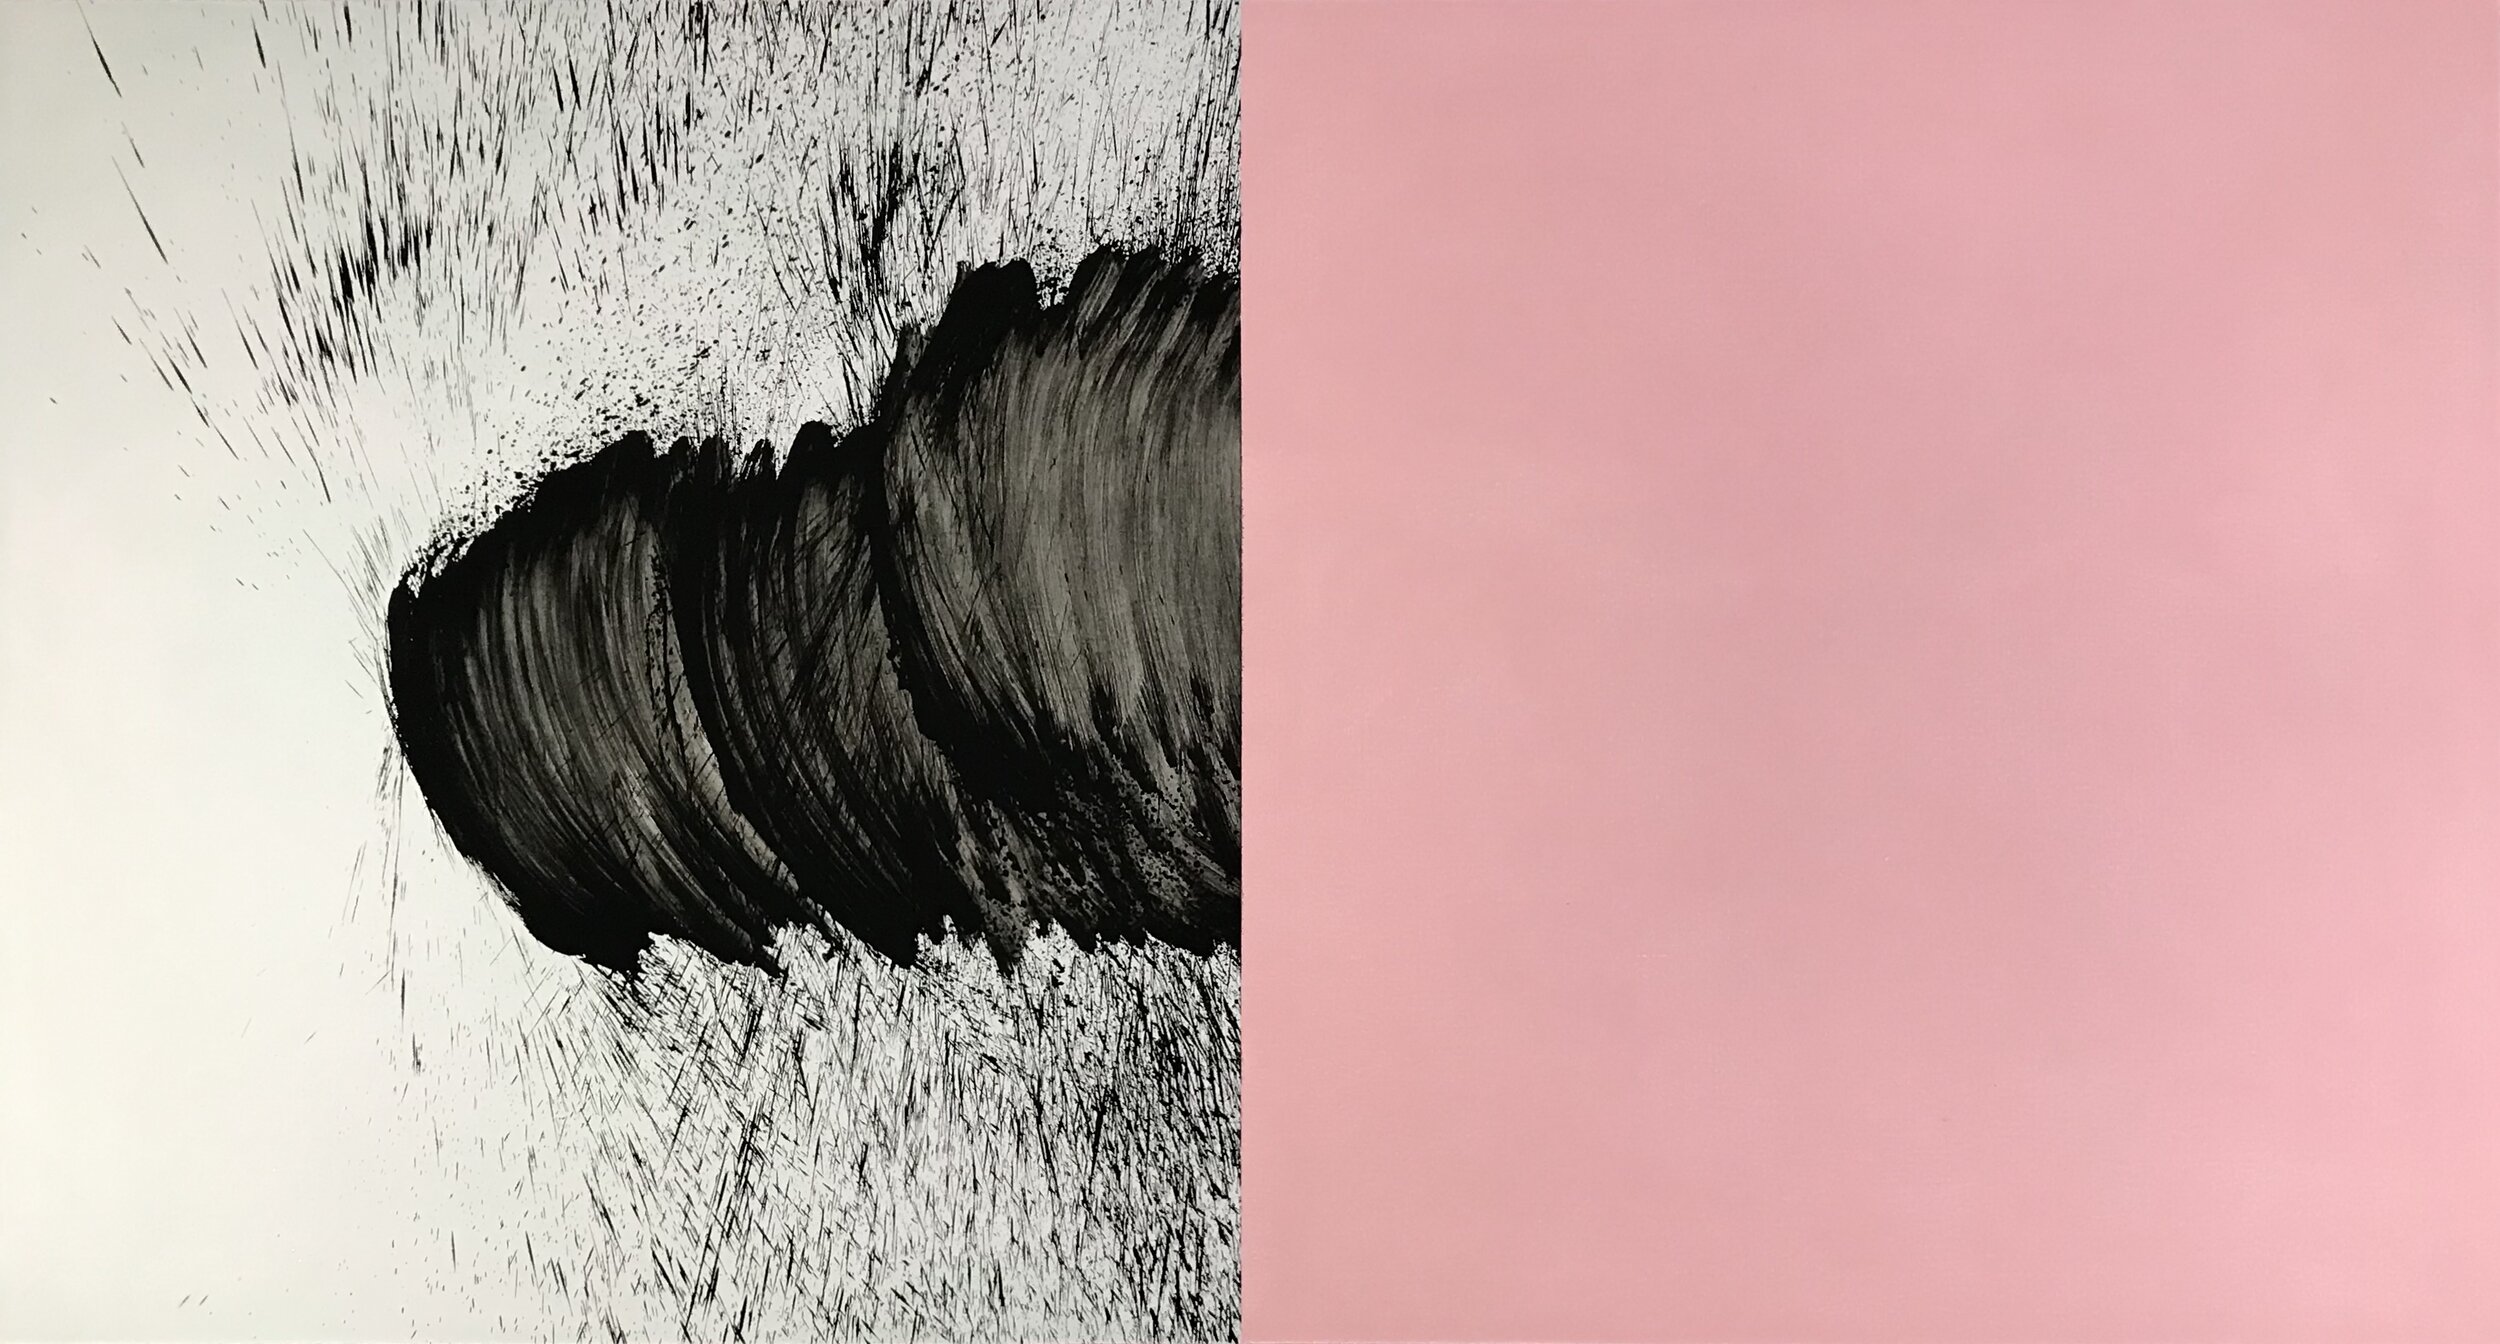 Ego Tombs (Pink and Gray)